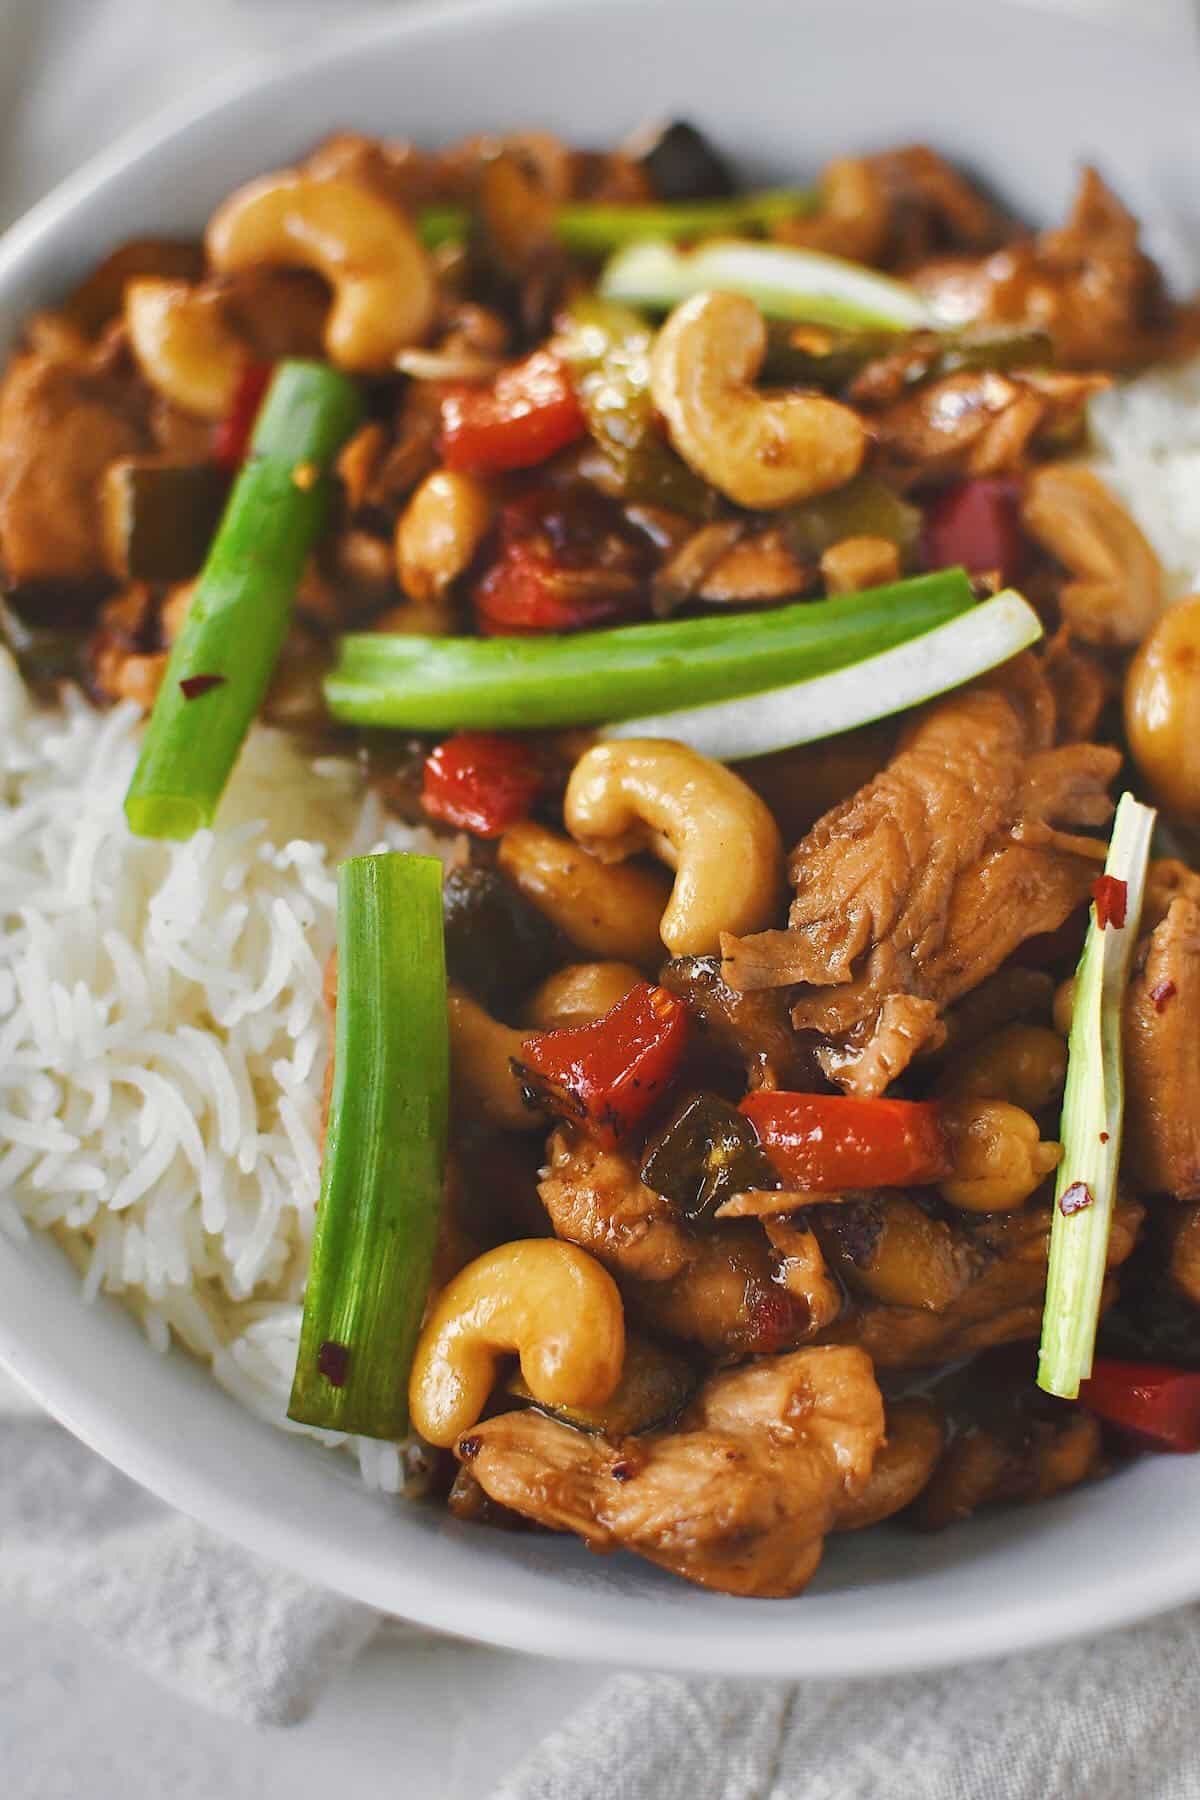 Cashew Chicken served over steamed basmati rice ready to eat.